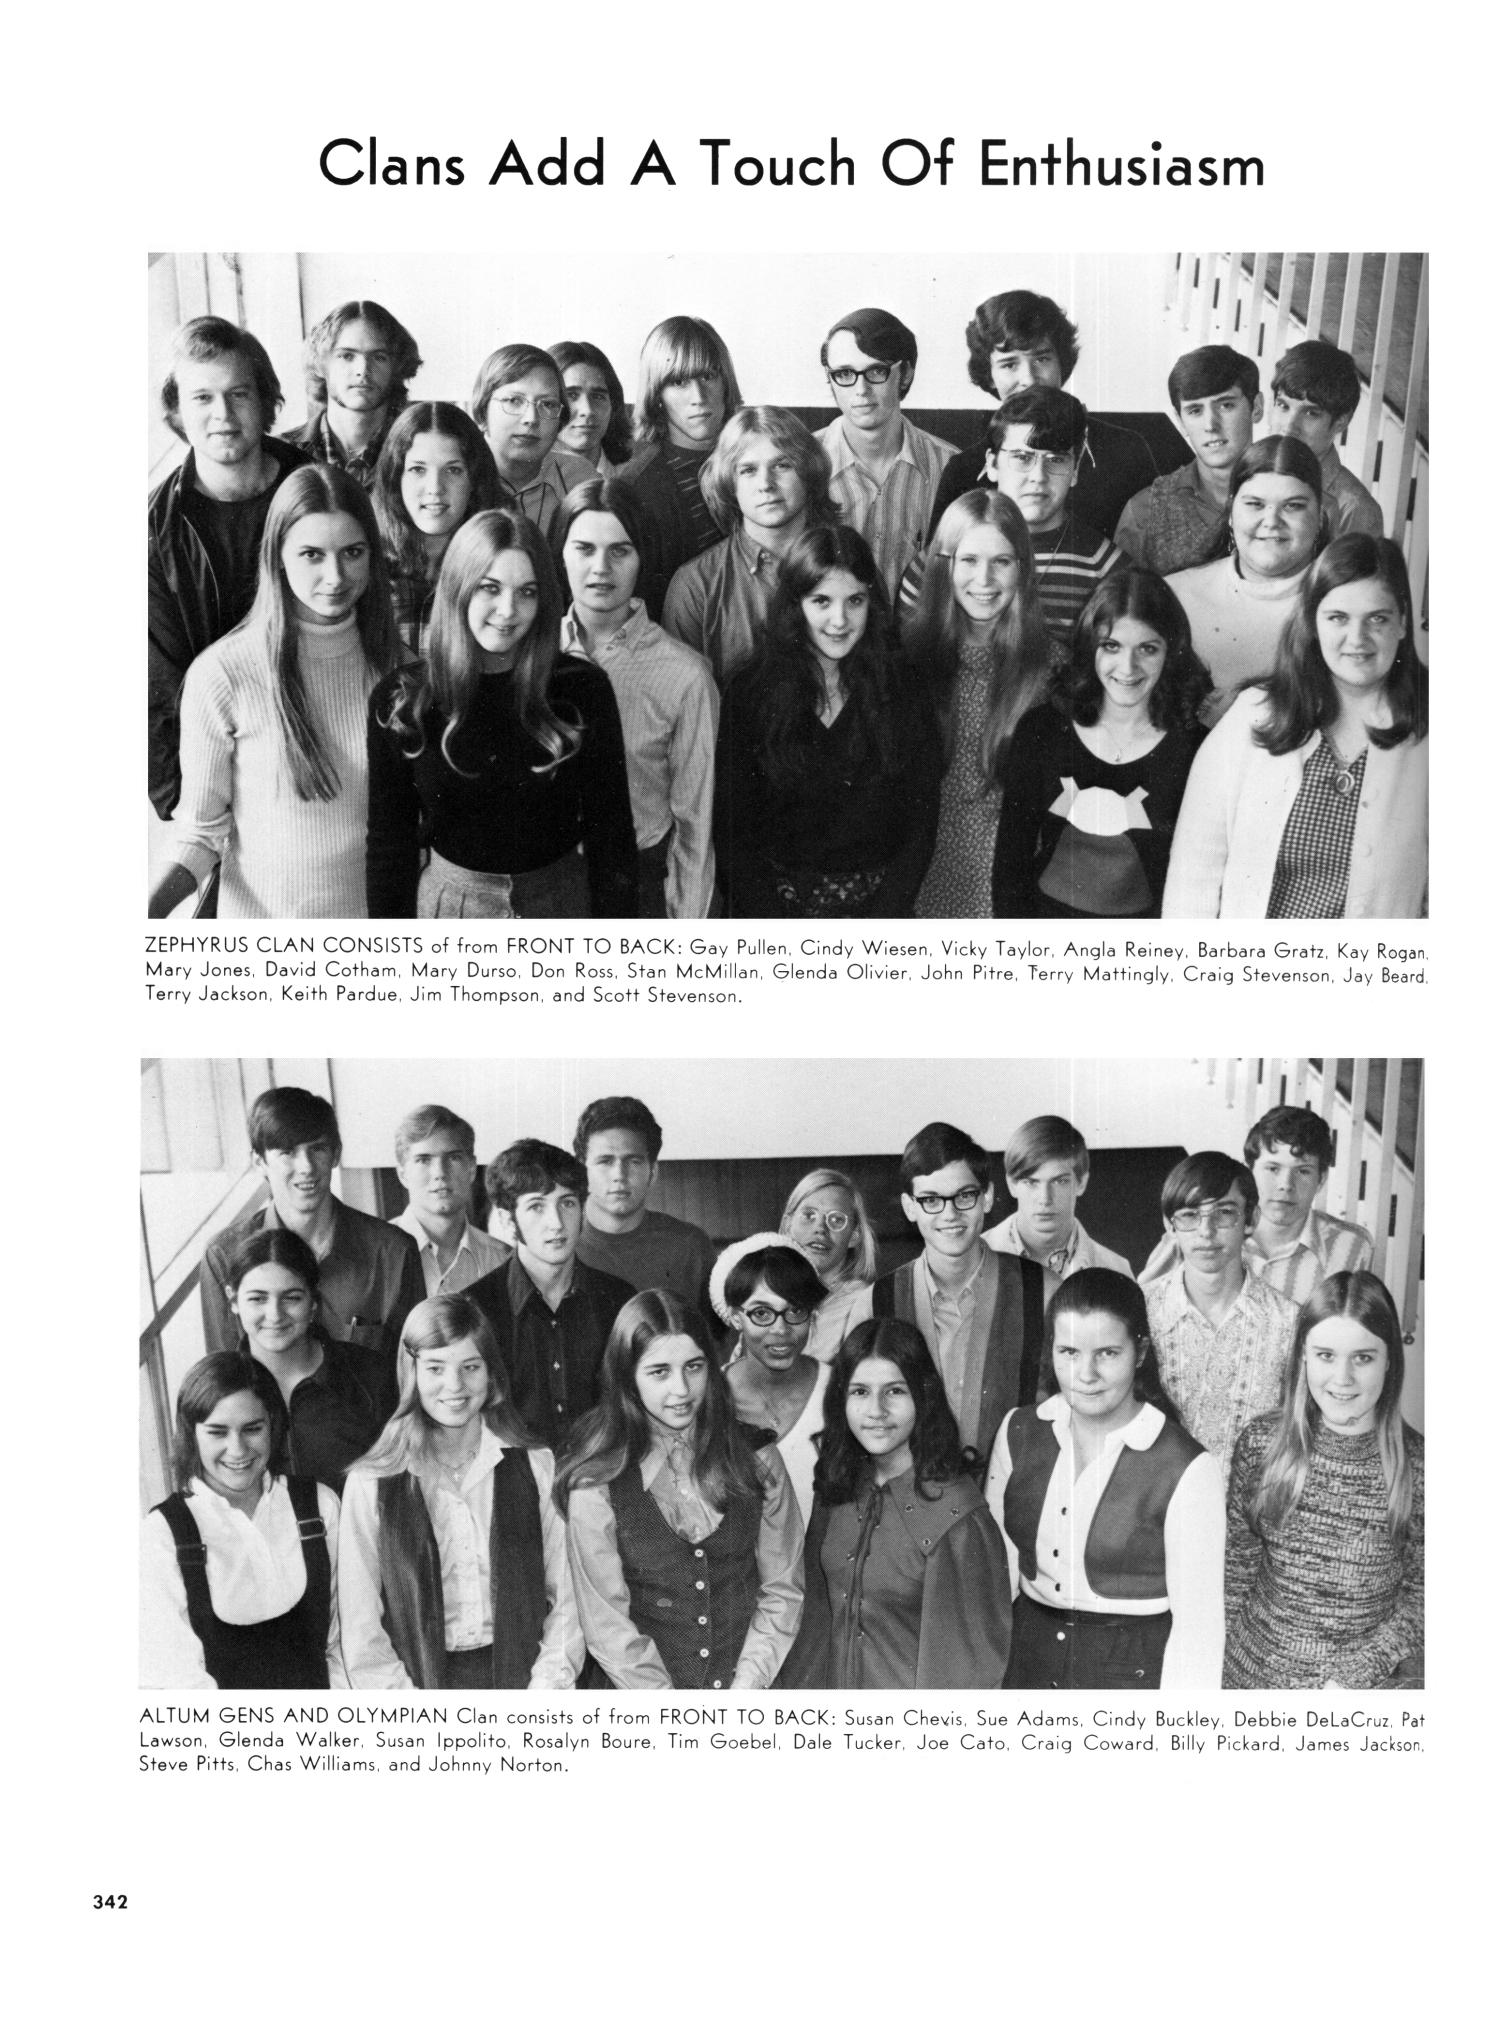 The Yellow Jacket, Yearbook of Thomas Jefferson High School, 1972
                                                
                                                    342
                                                